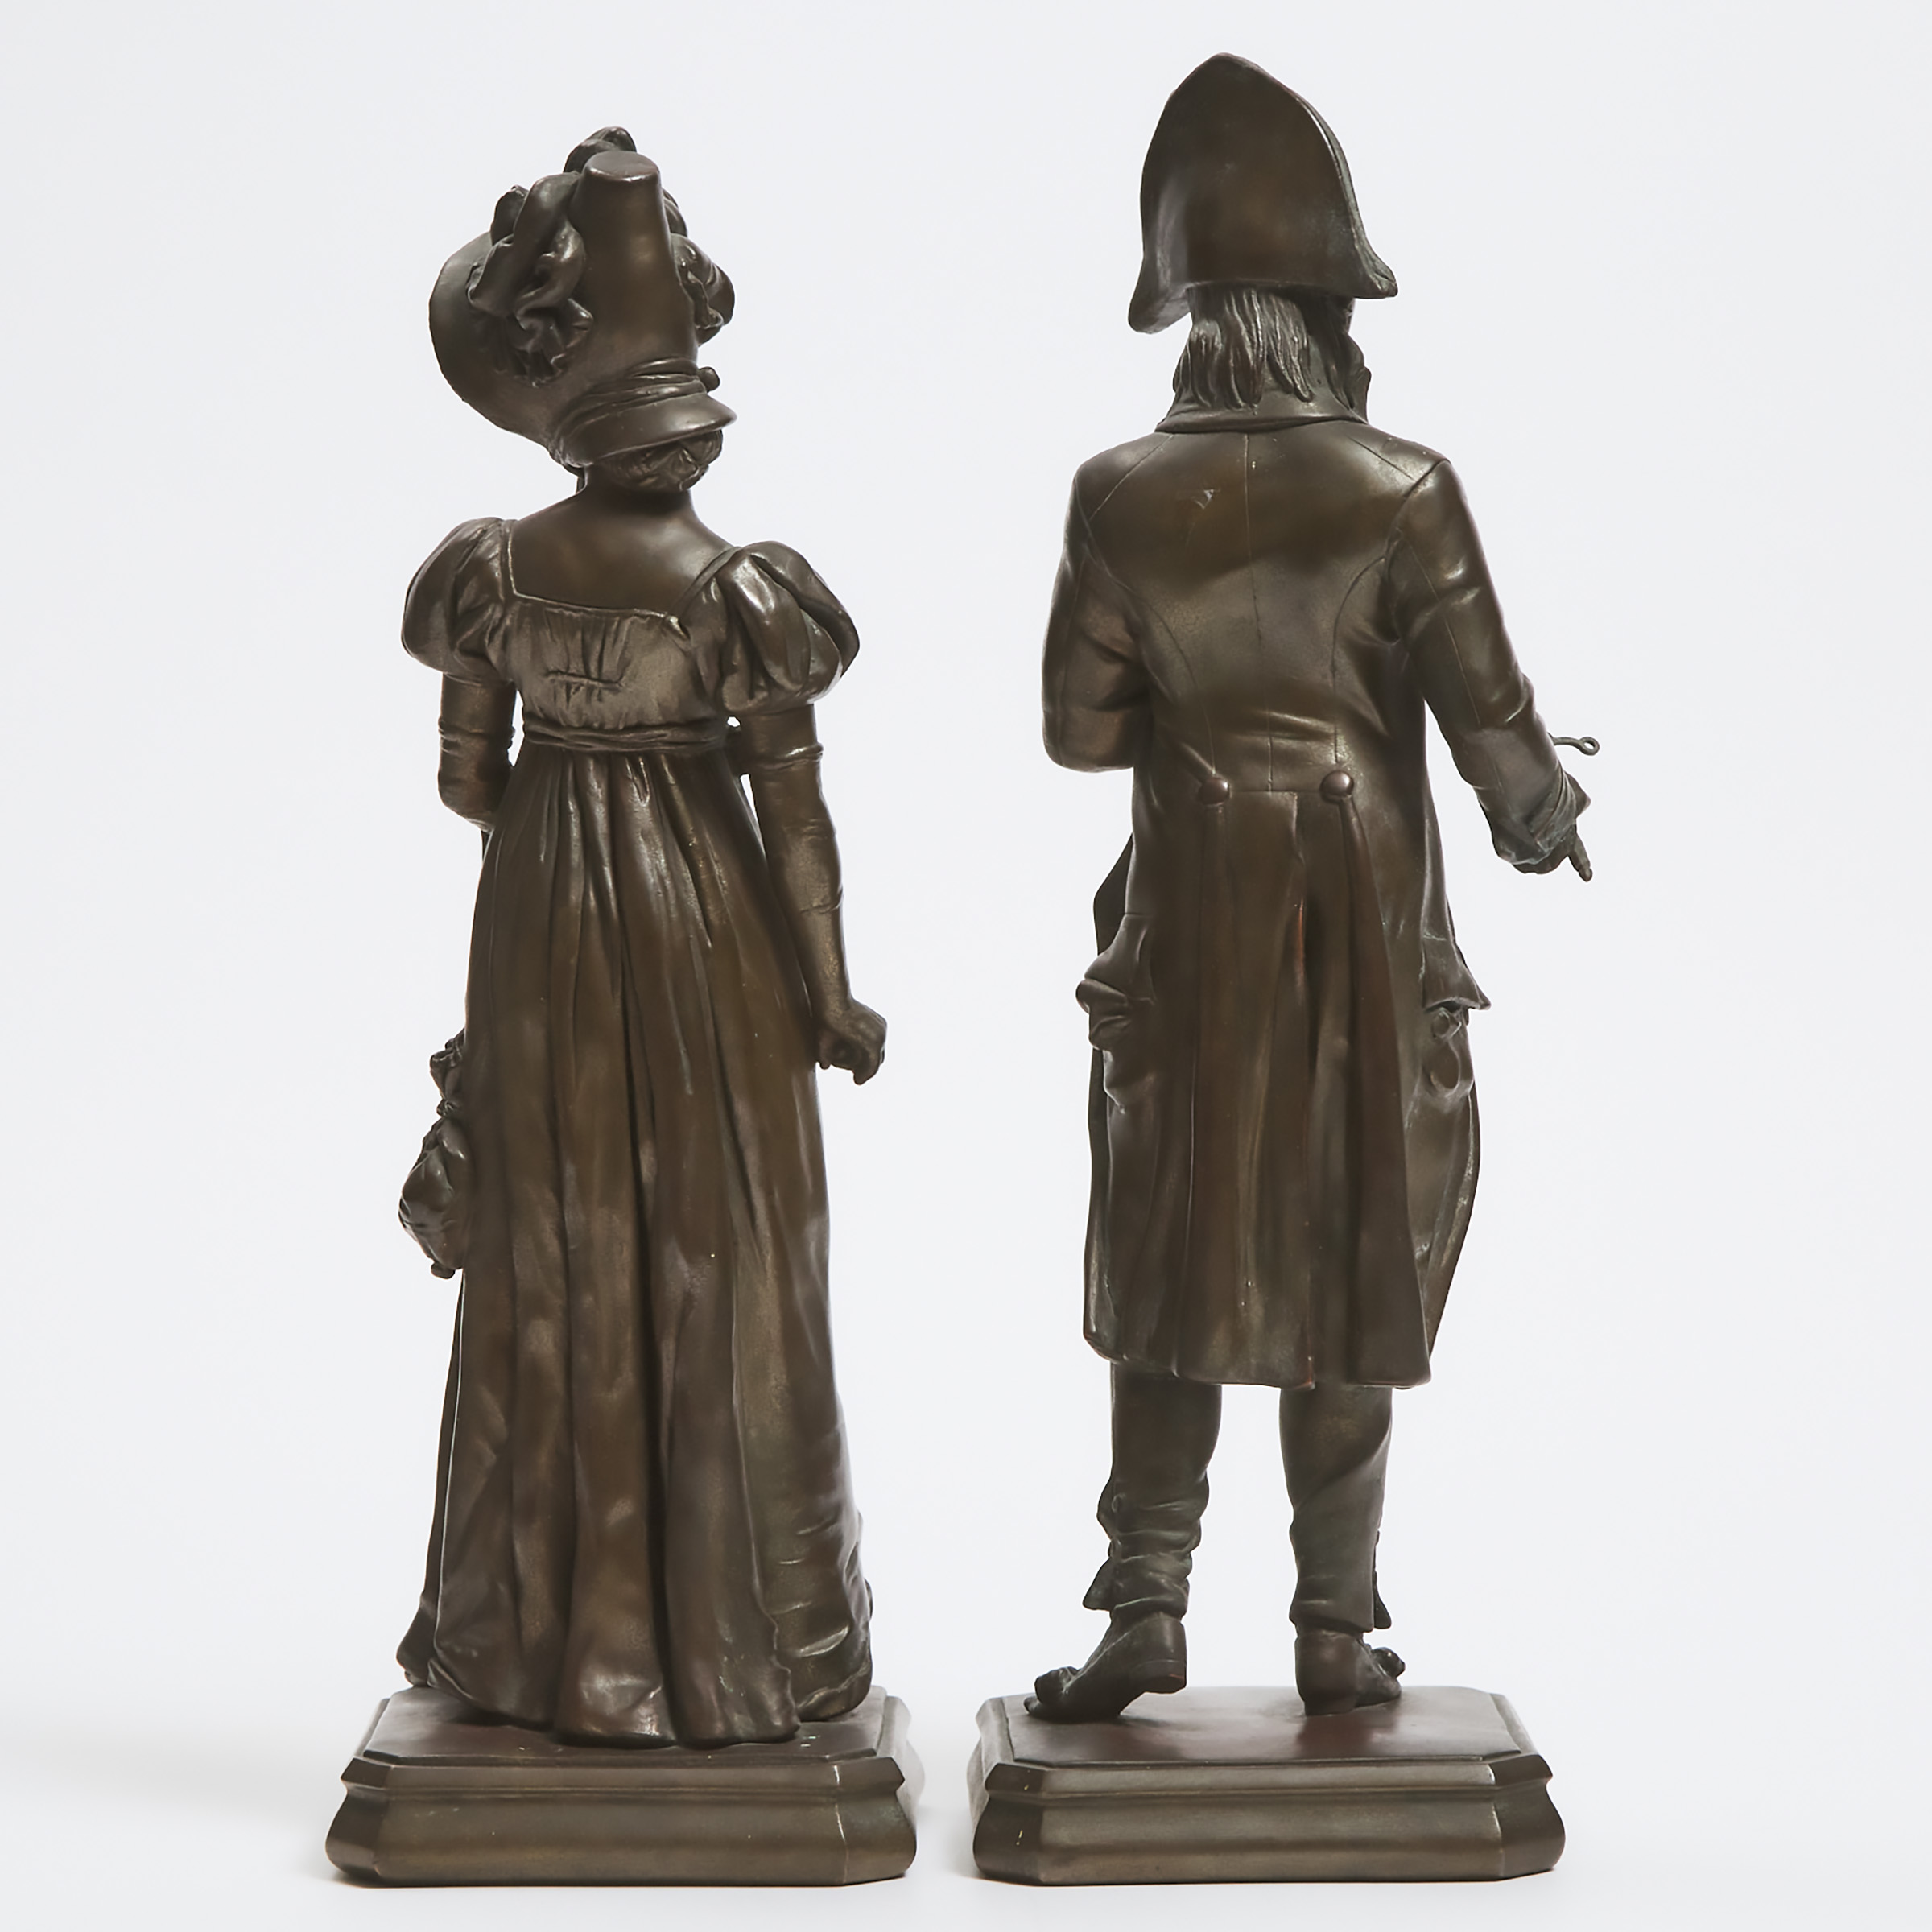 Pair of Copper Electrotype Figures in Biedermeier Fashion, late 19th century